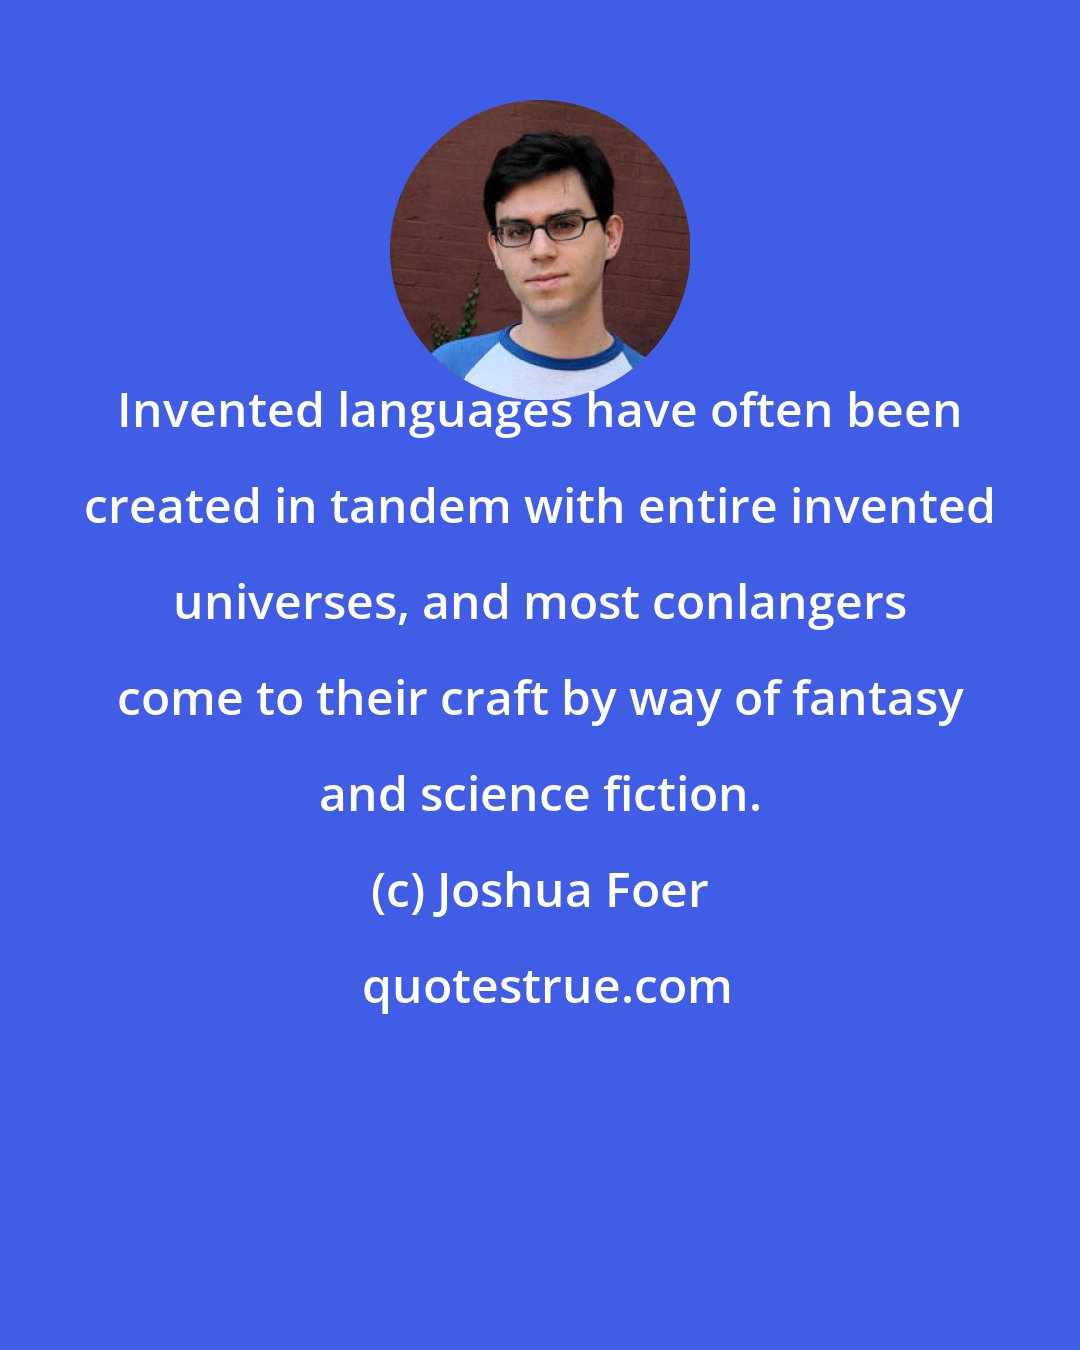 Joshua Foer: Invented languages have often been created in tandem with entire invented universes, and most conlangers come to their craft by way of fantasy and science fiction.